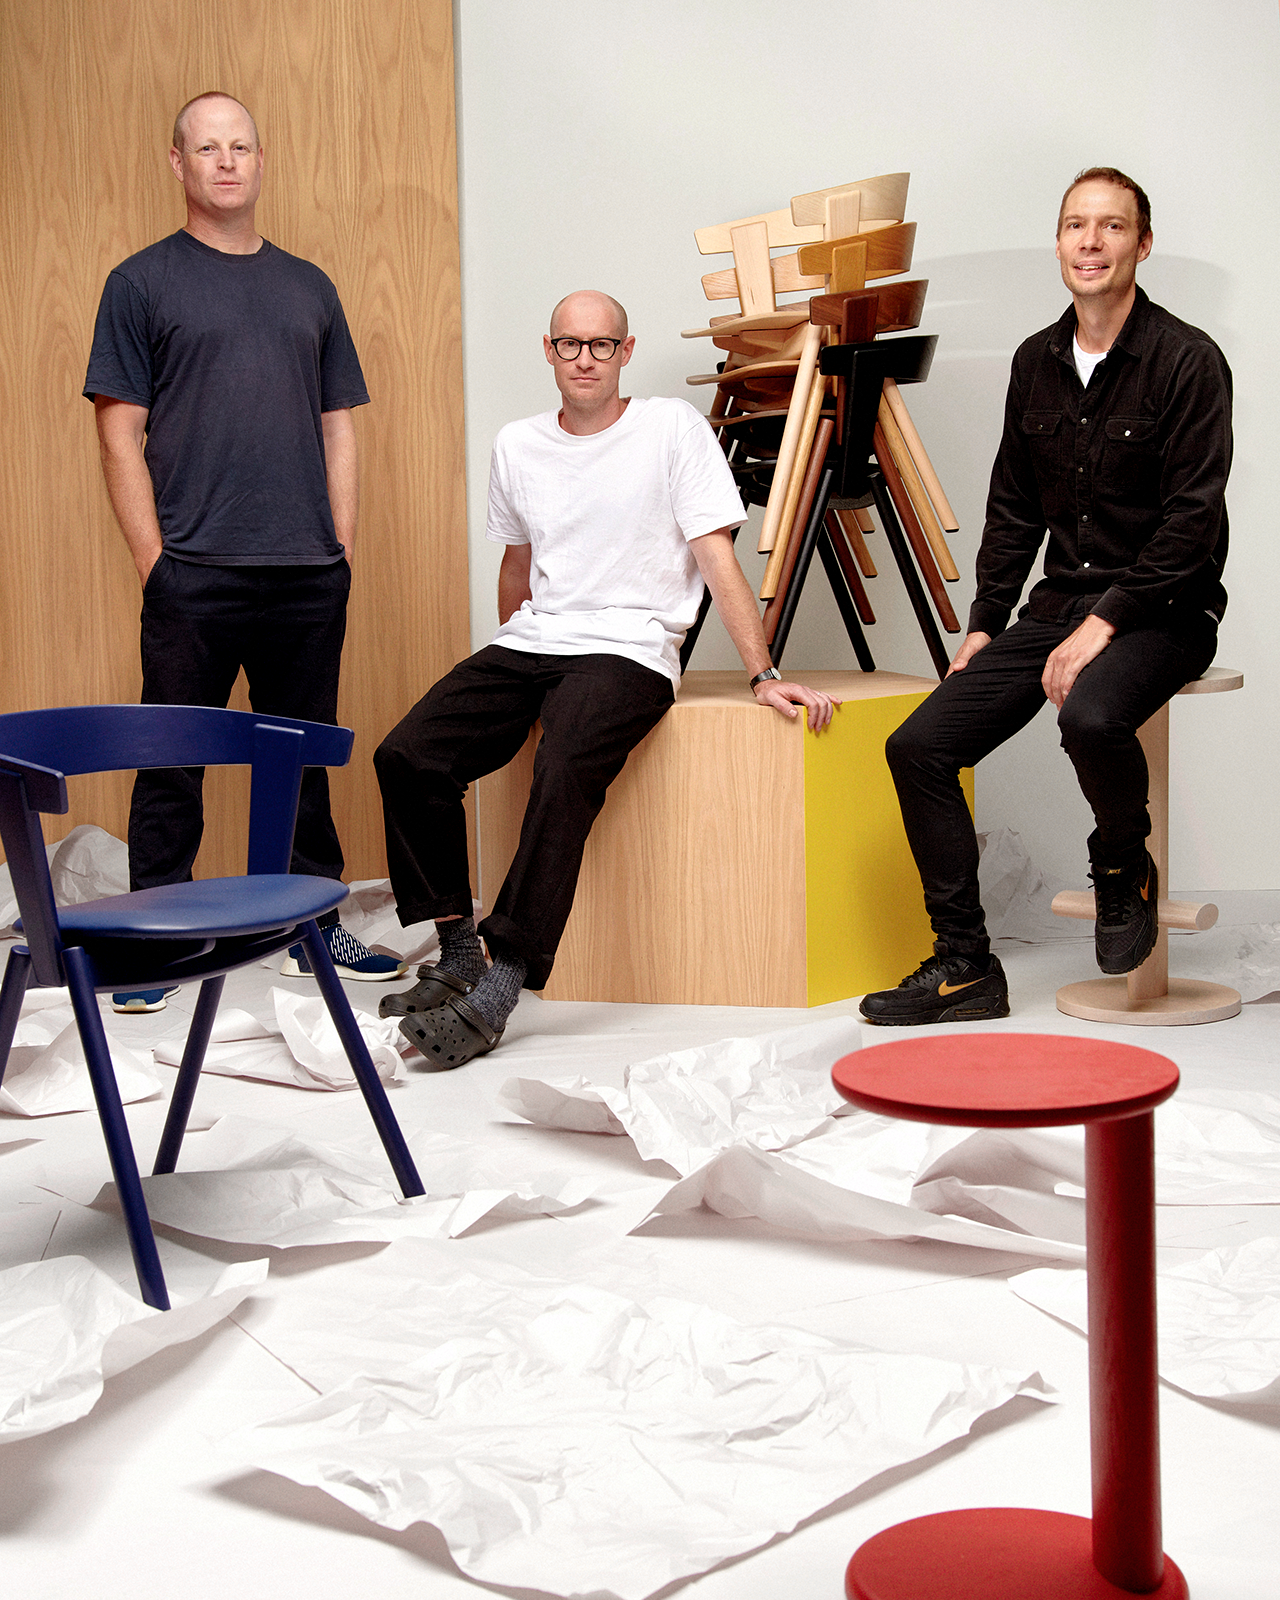 The Oku Space design team proudly poses alongside pieces from their debut furniture collection.